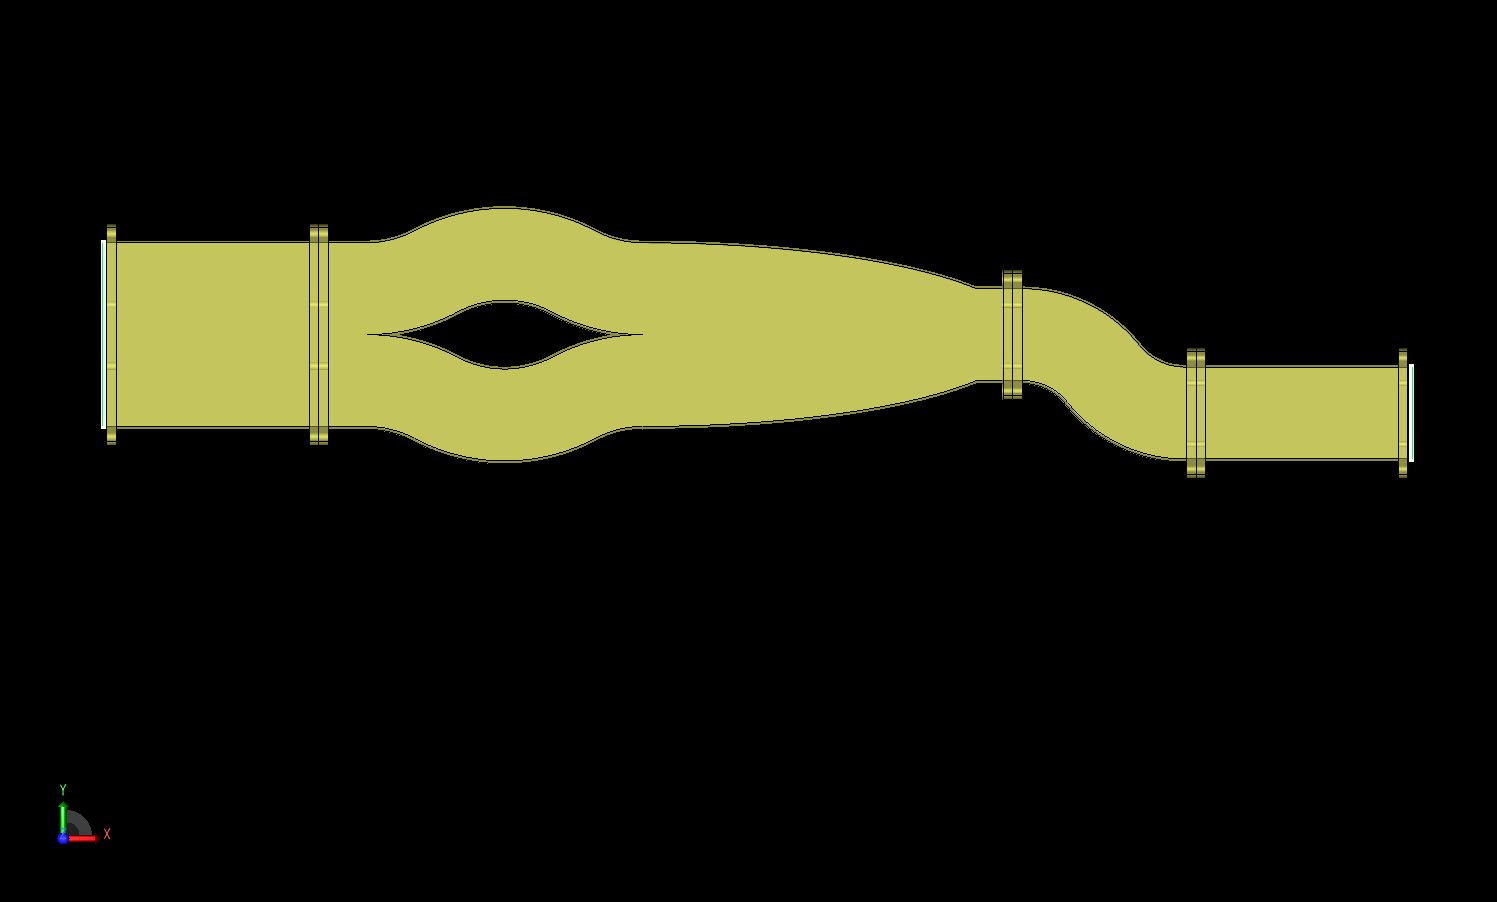 Figure 11CAD geometry for the multi-mode converter shown in a cross-sectional view.